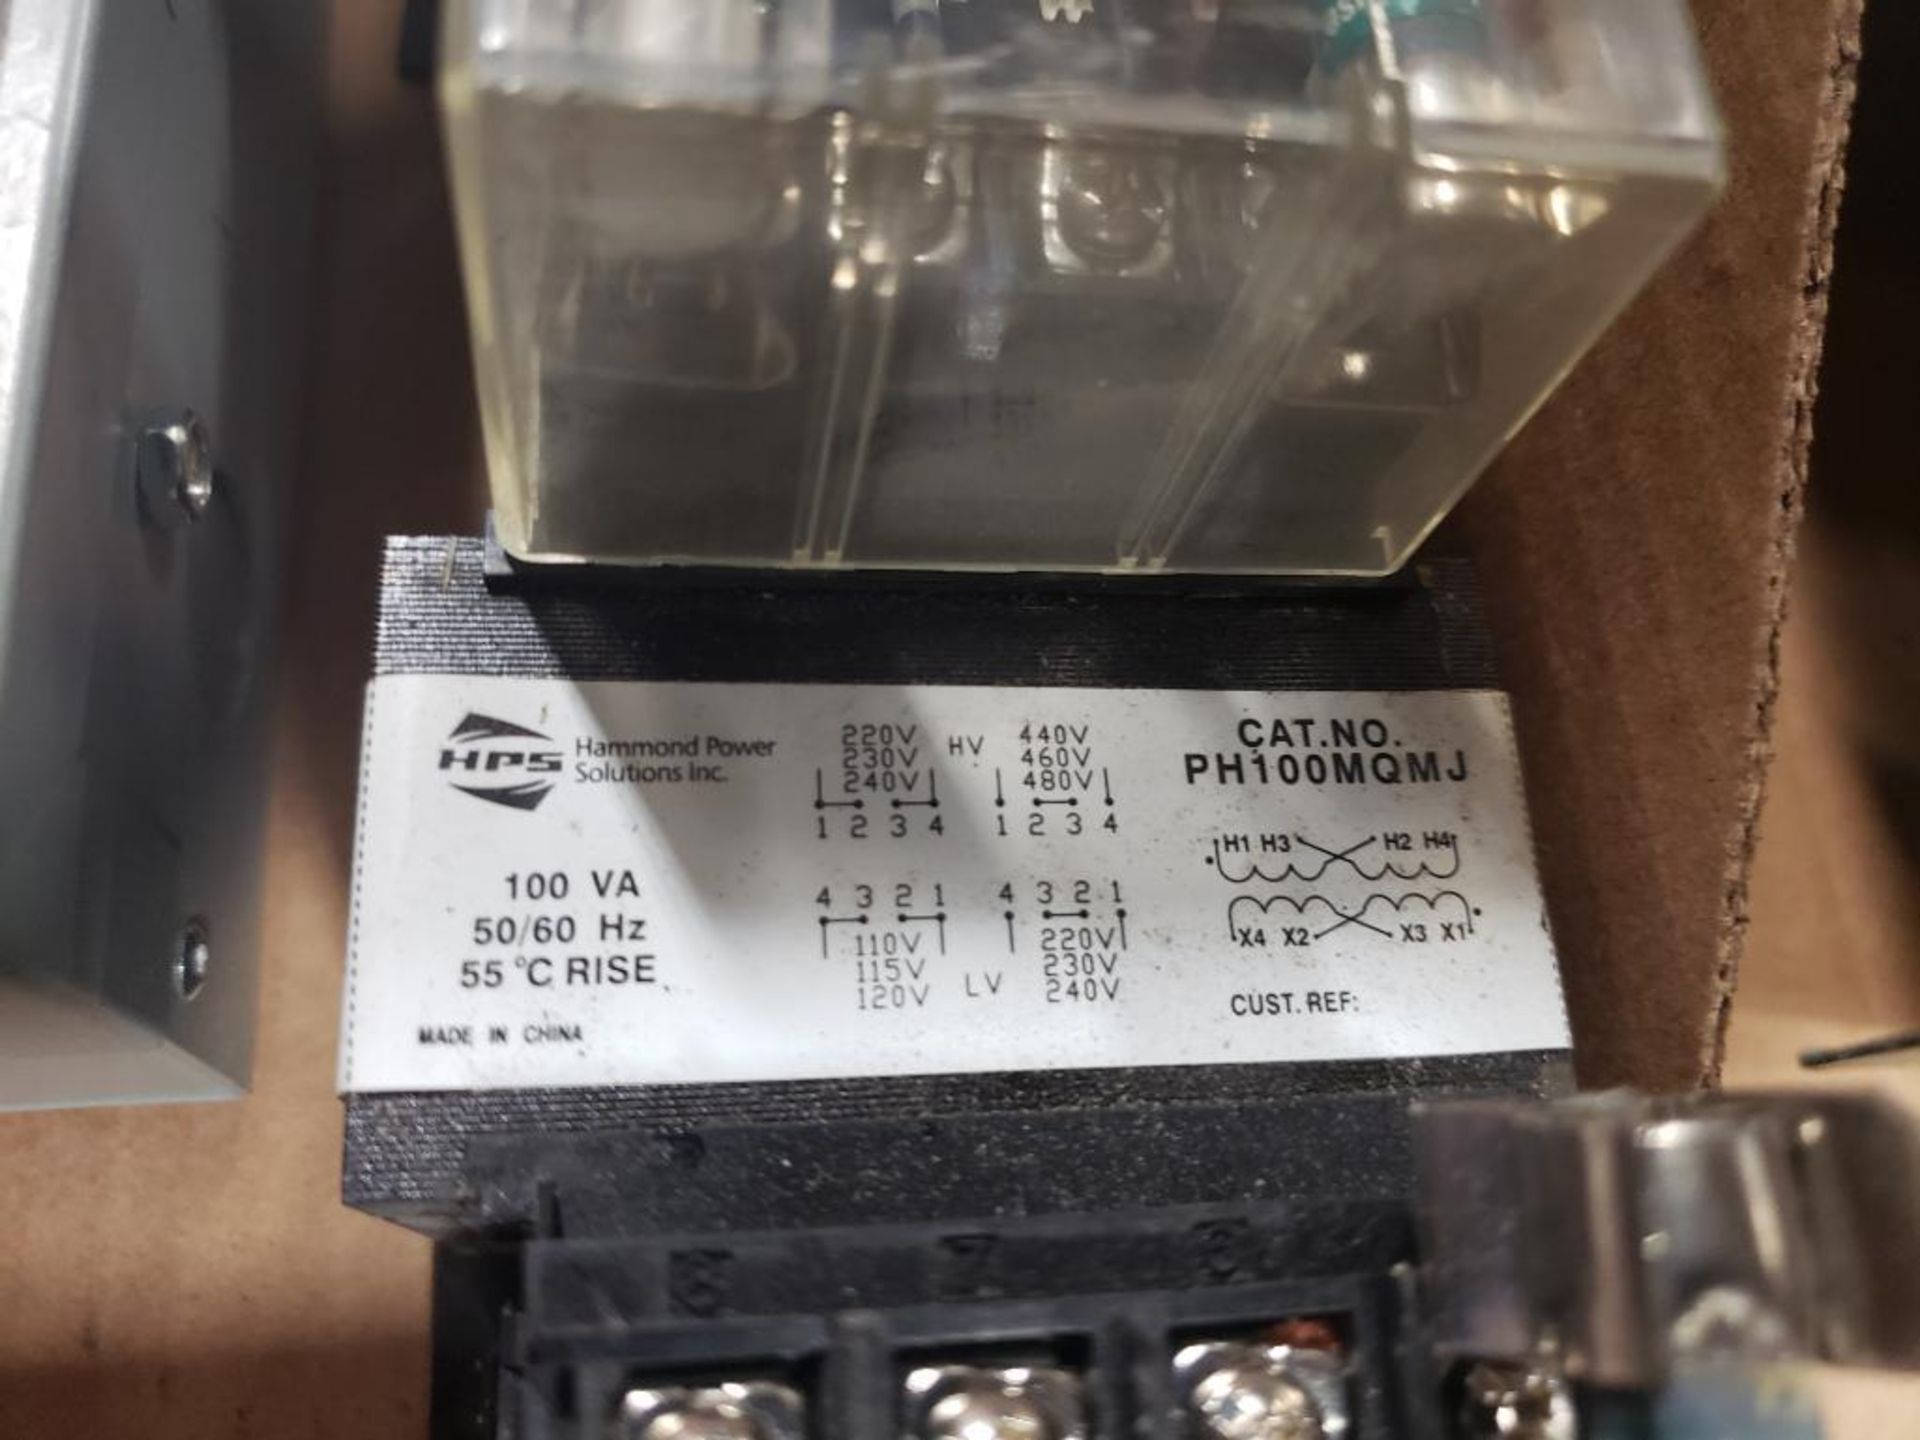 Qty 3 - Assorted electrical transformer,. Jefferson Electric, Hammond Power Solutions. - Image 6 of 6